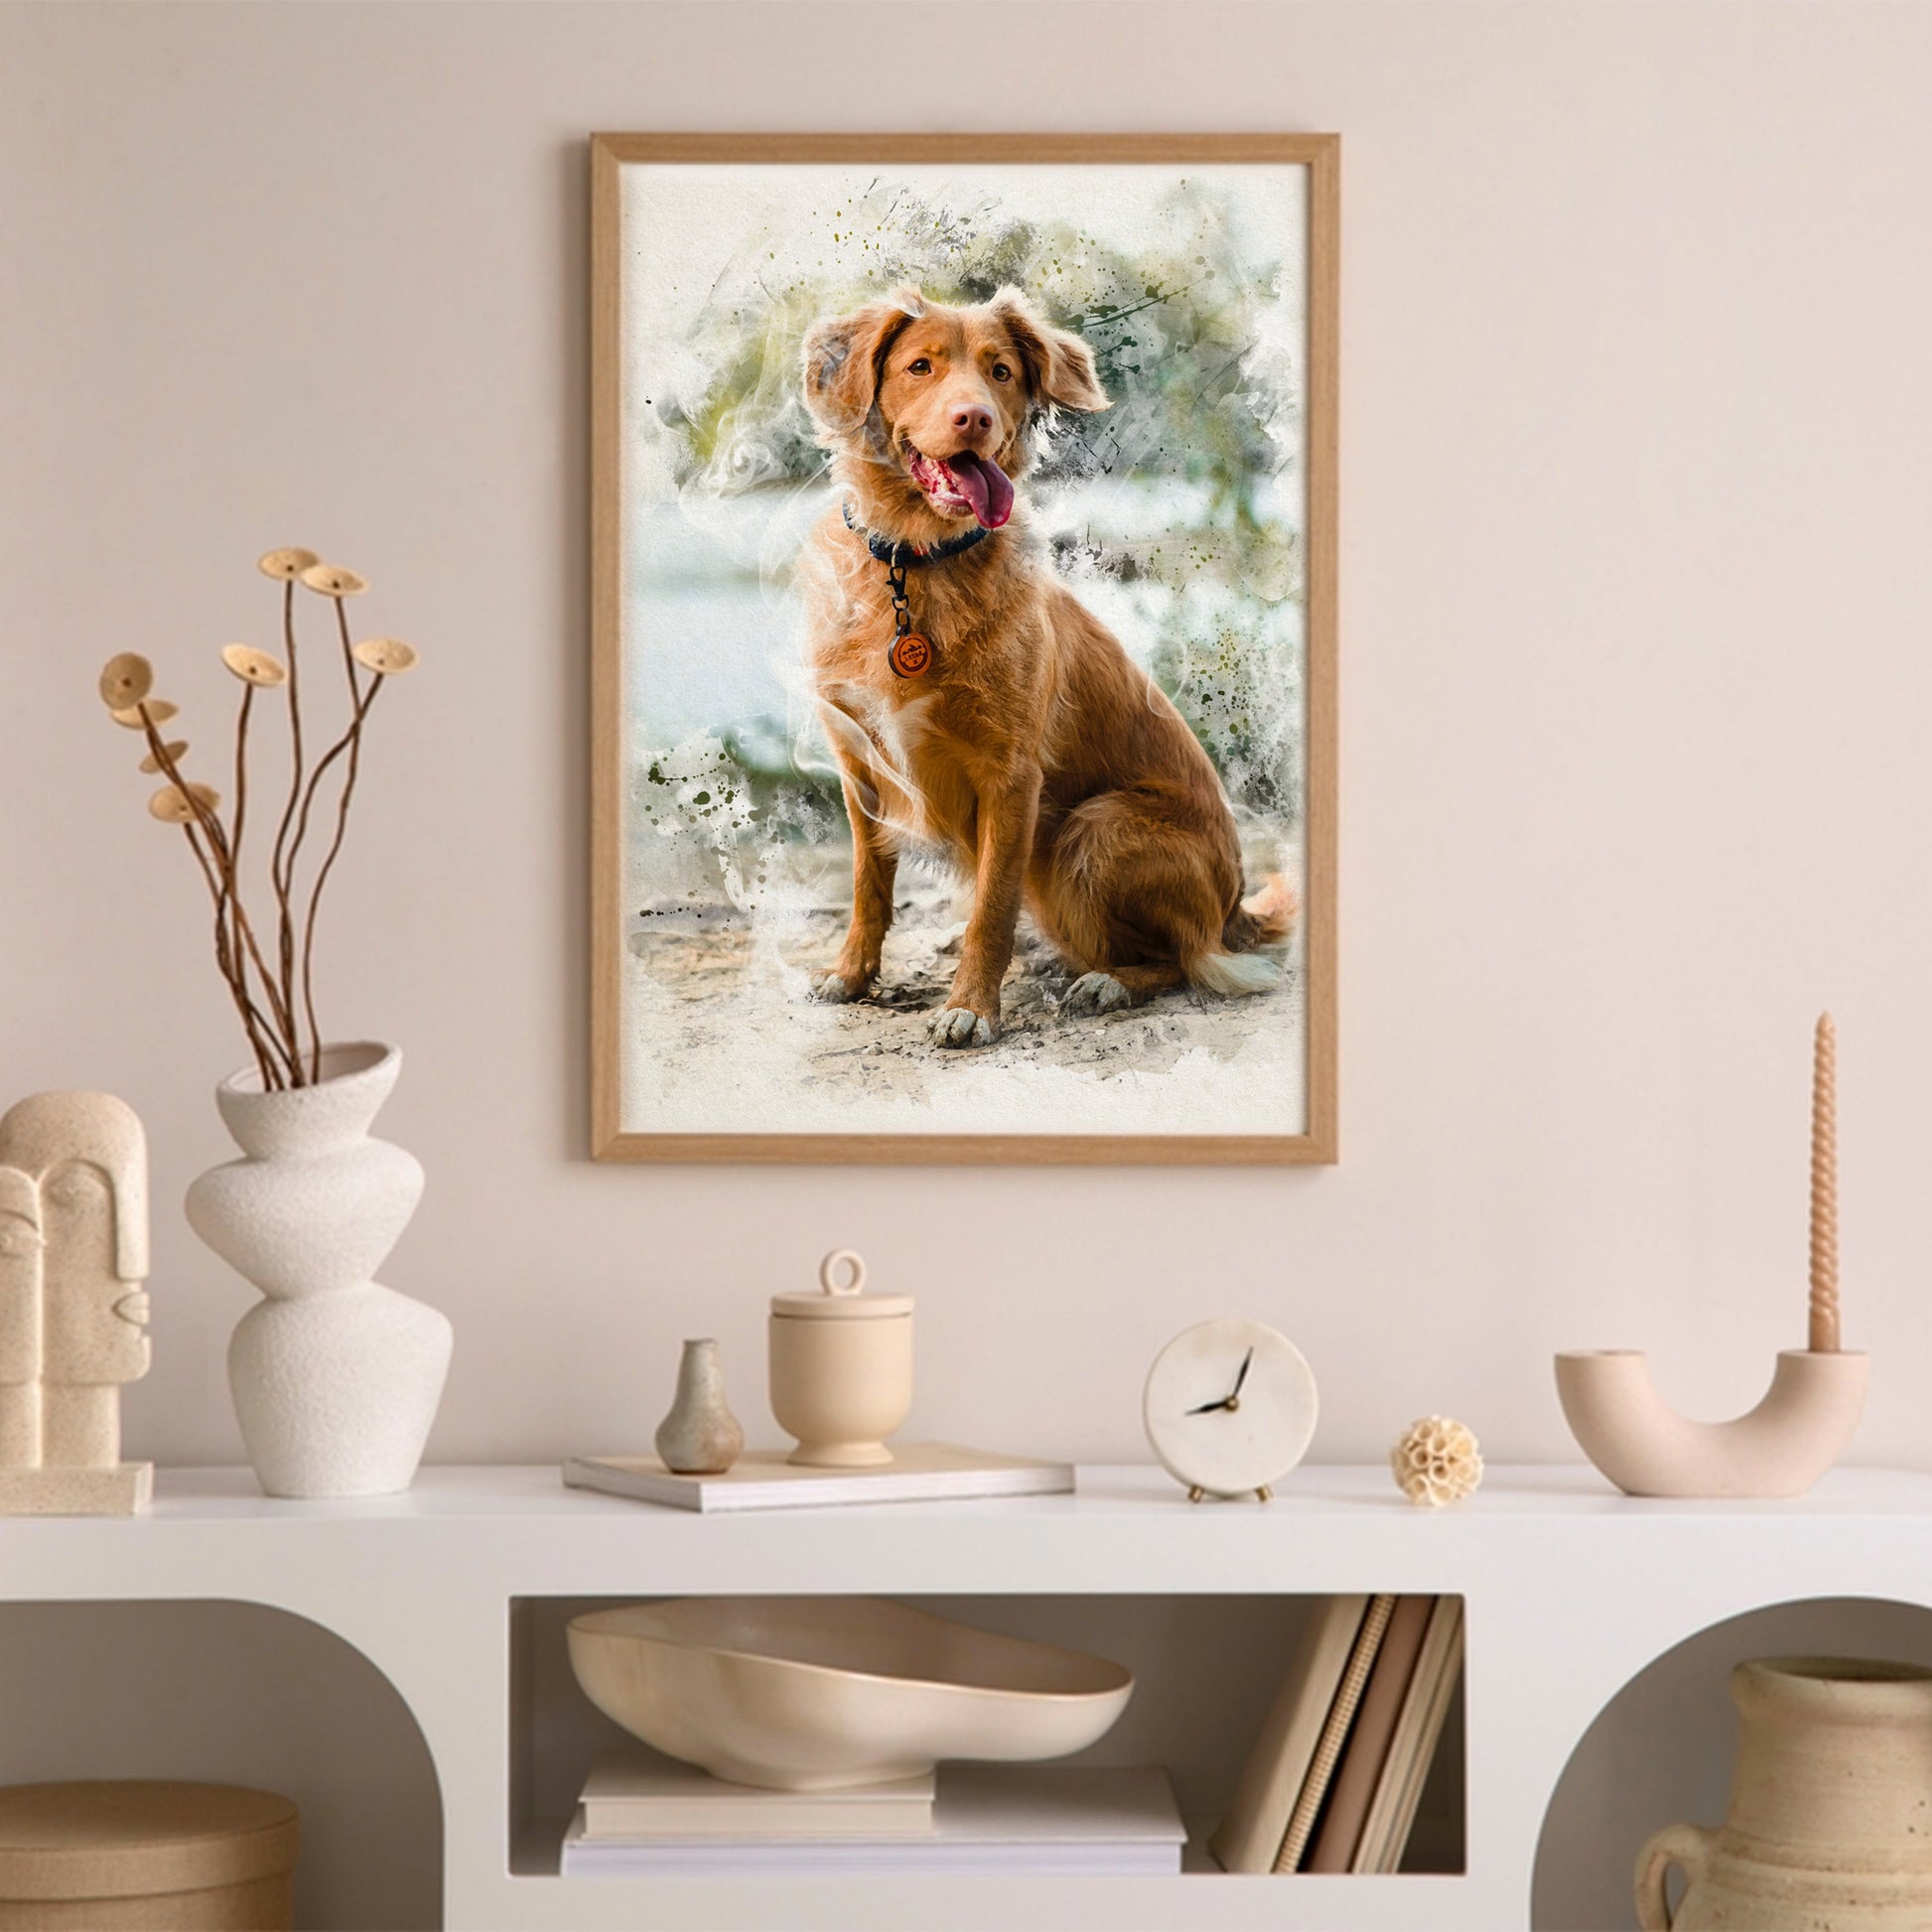 Custom pet portrait framed on wall canvas, personalized and charming-dog portrait